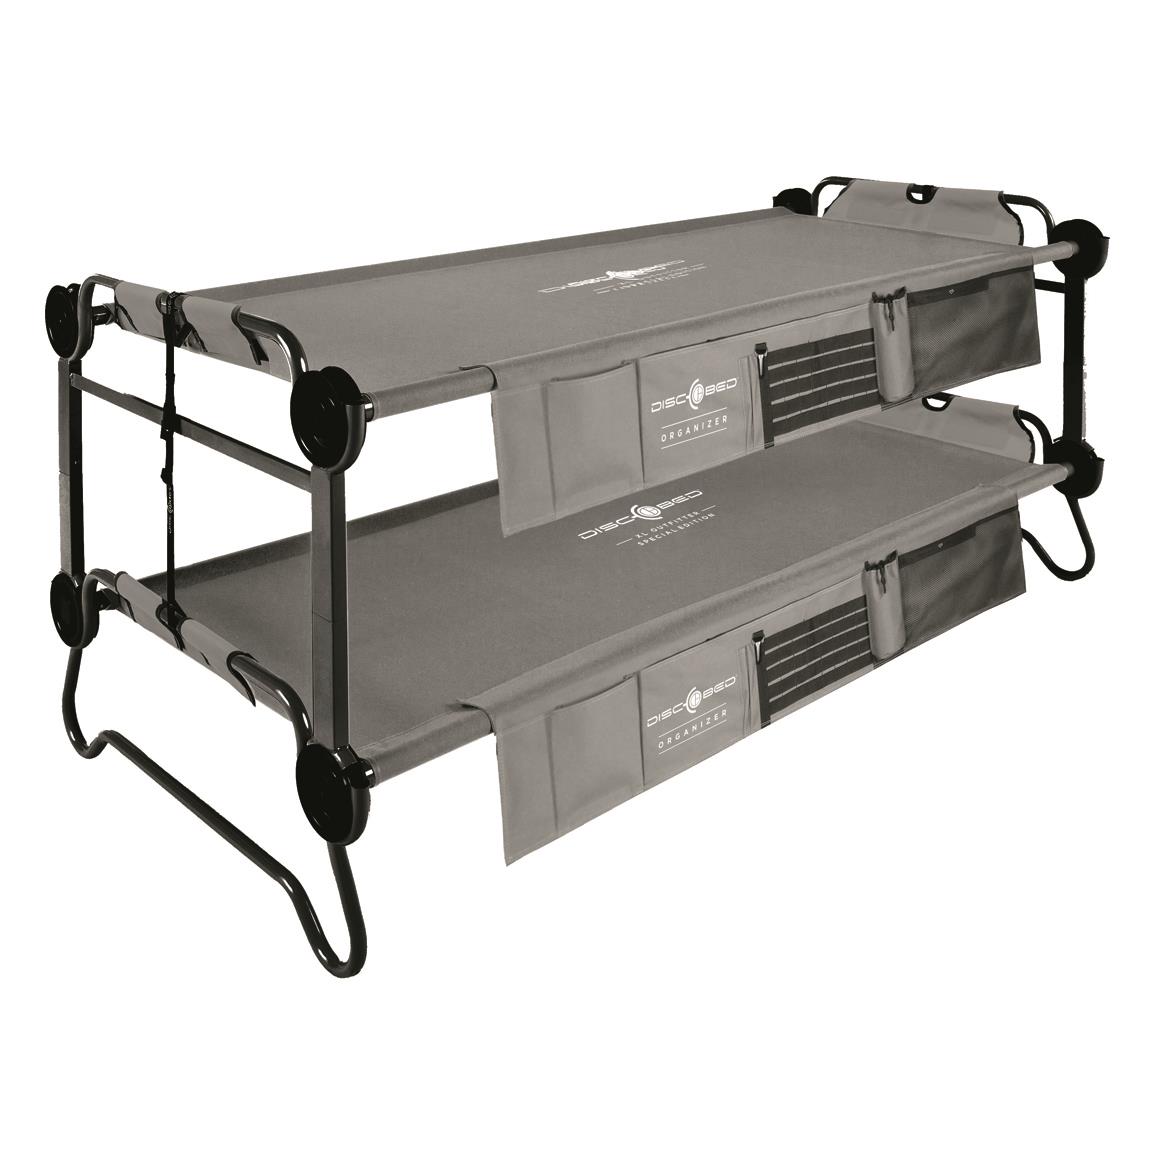 Disc-O-Bed XL Outfitter, Special Edition with Organizers